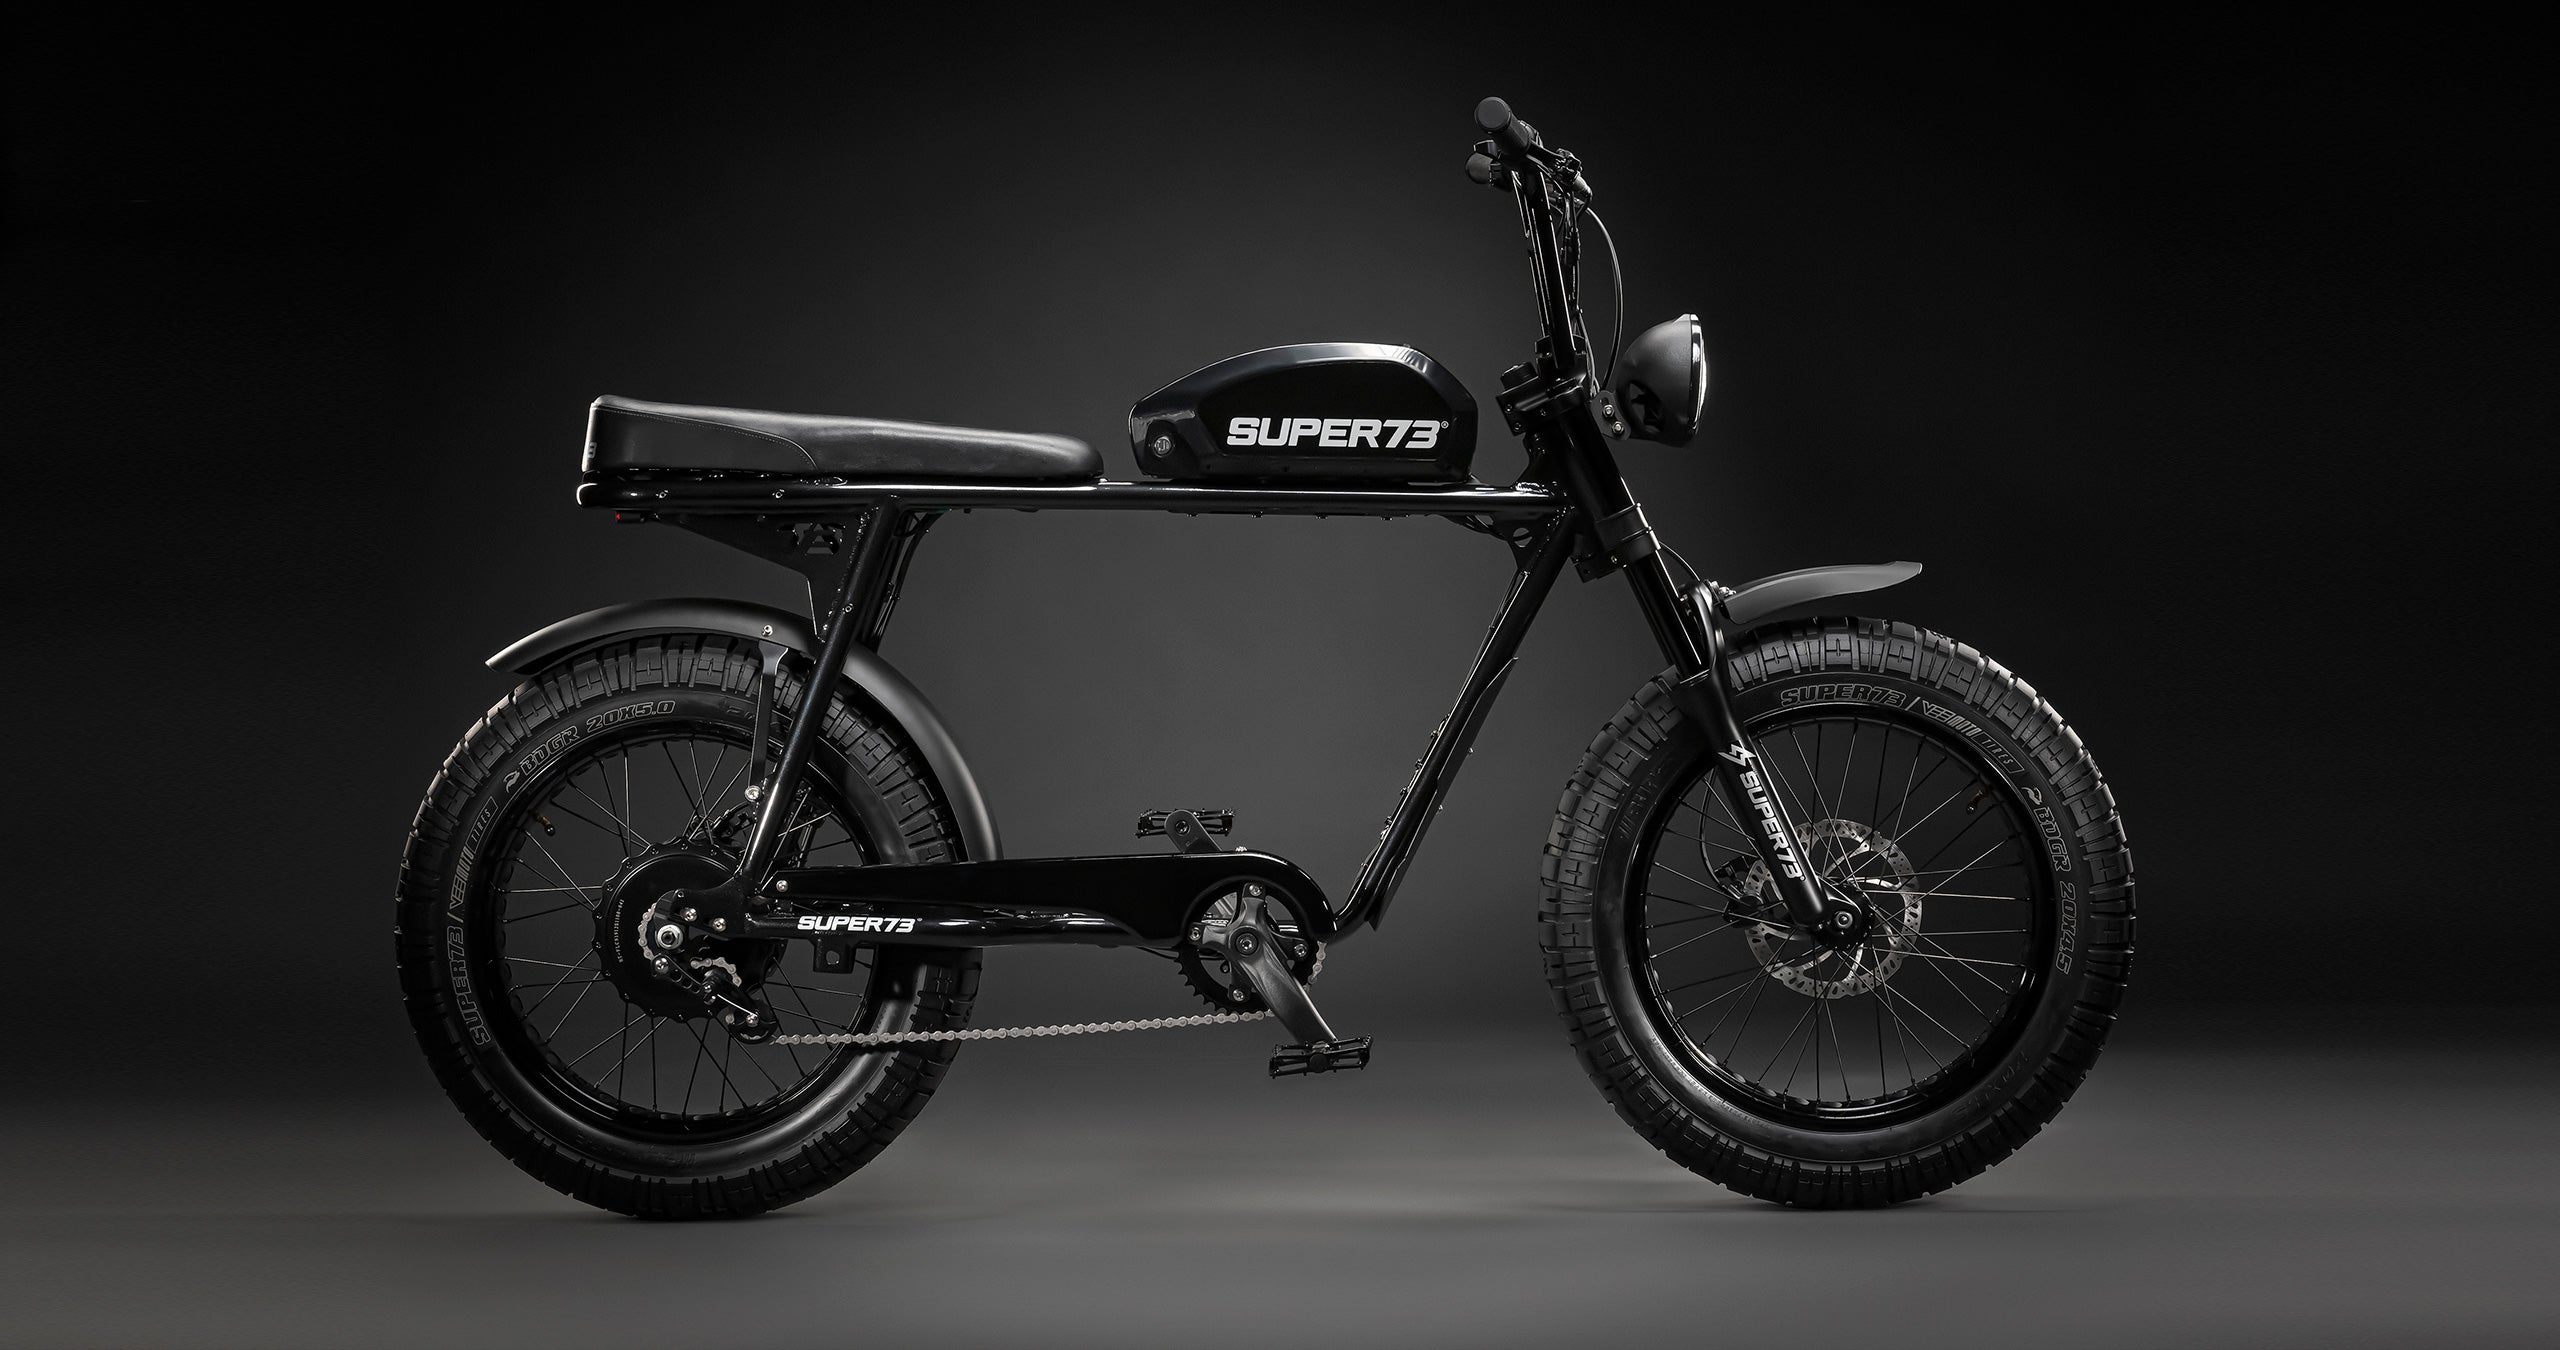 Super73-ZX – Vintage Iron Cycles